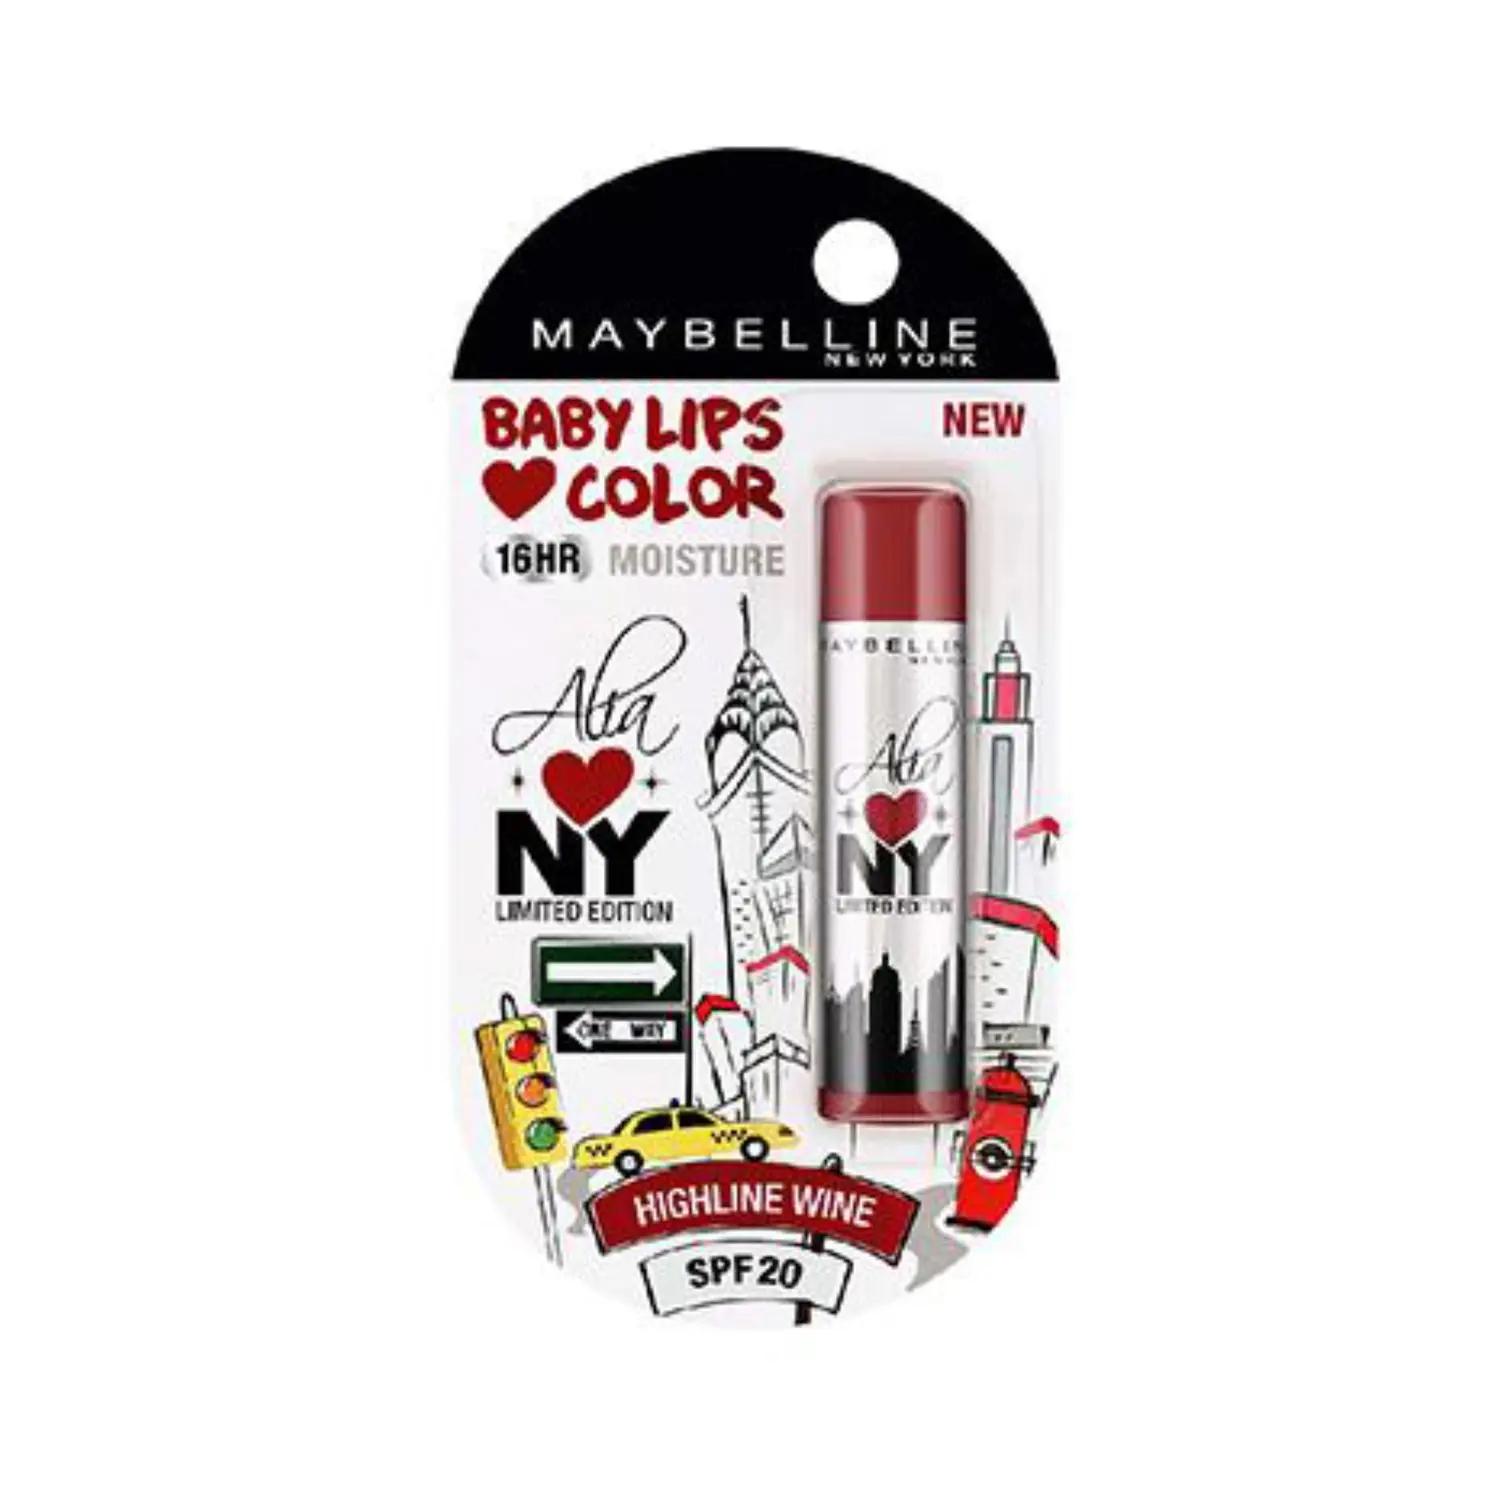 maybelline-new-york-baby-lips-colour-limited-edition-lip-balm---highline-wine-(4g)